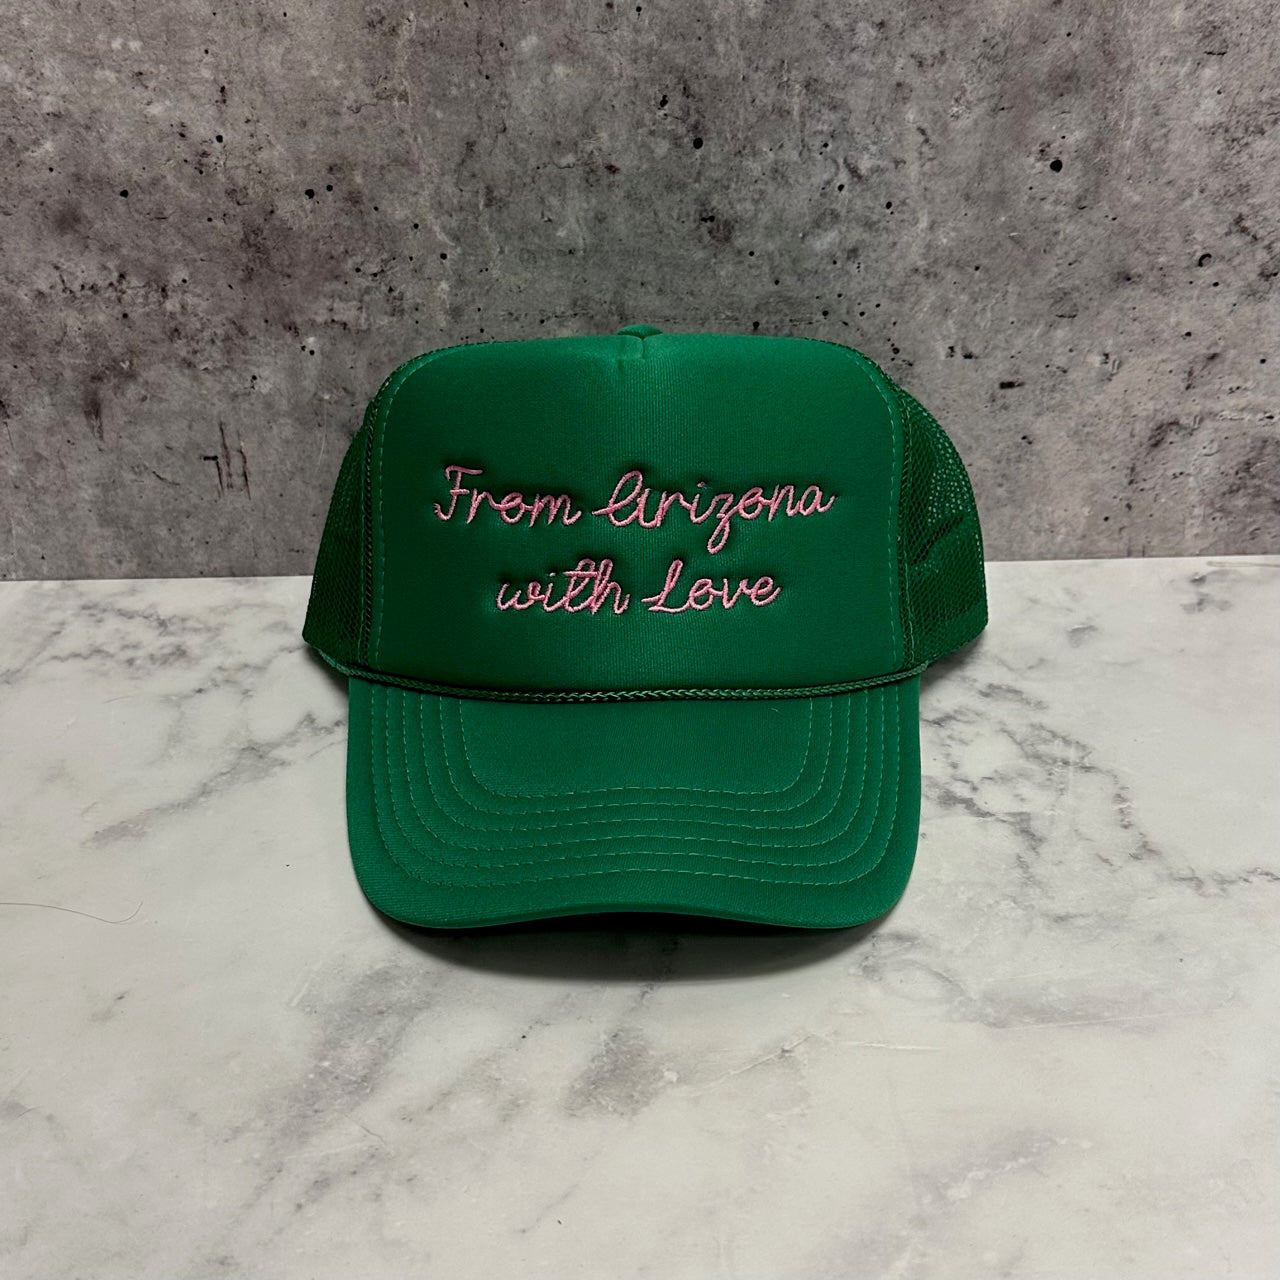 From Arizona with Love Trucker Hat